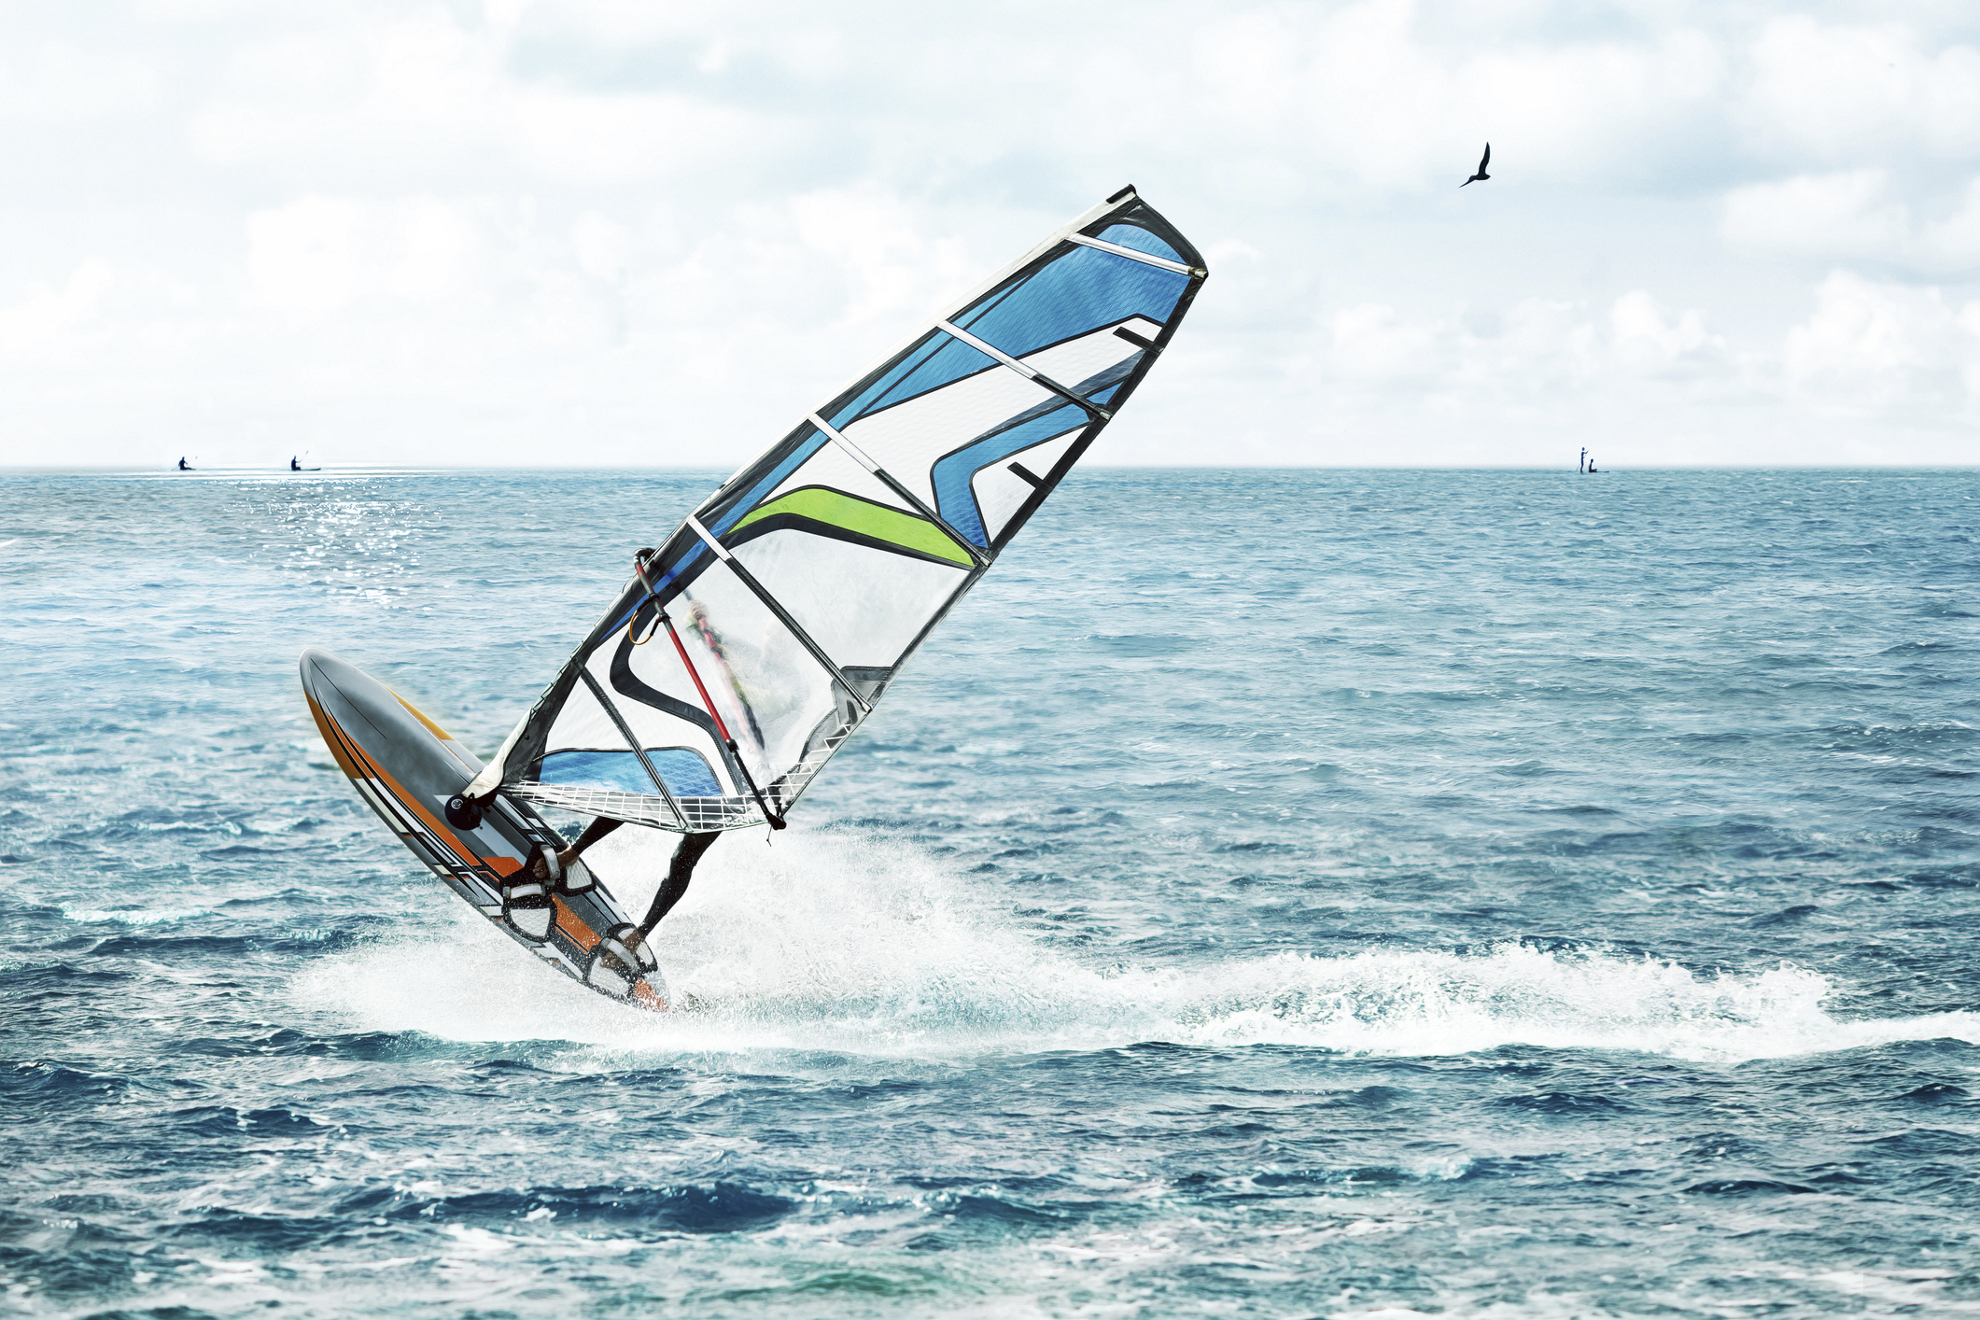 Windsurfer, fun in the blue ocean with waves